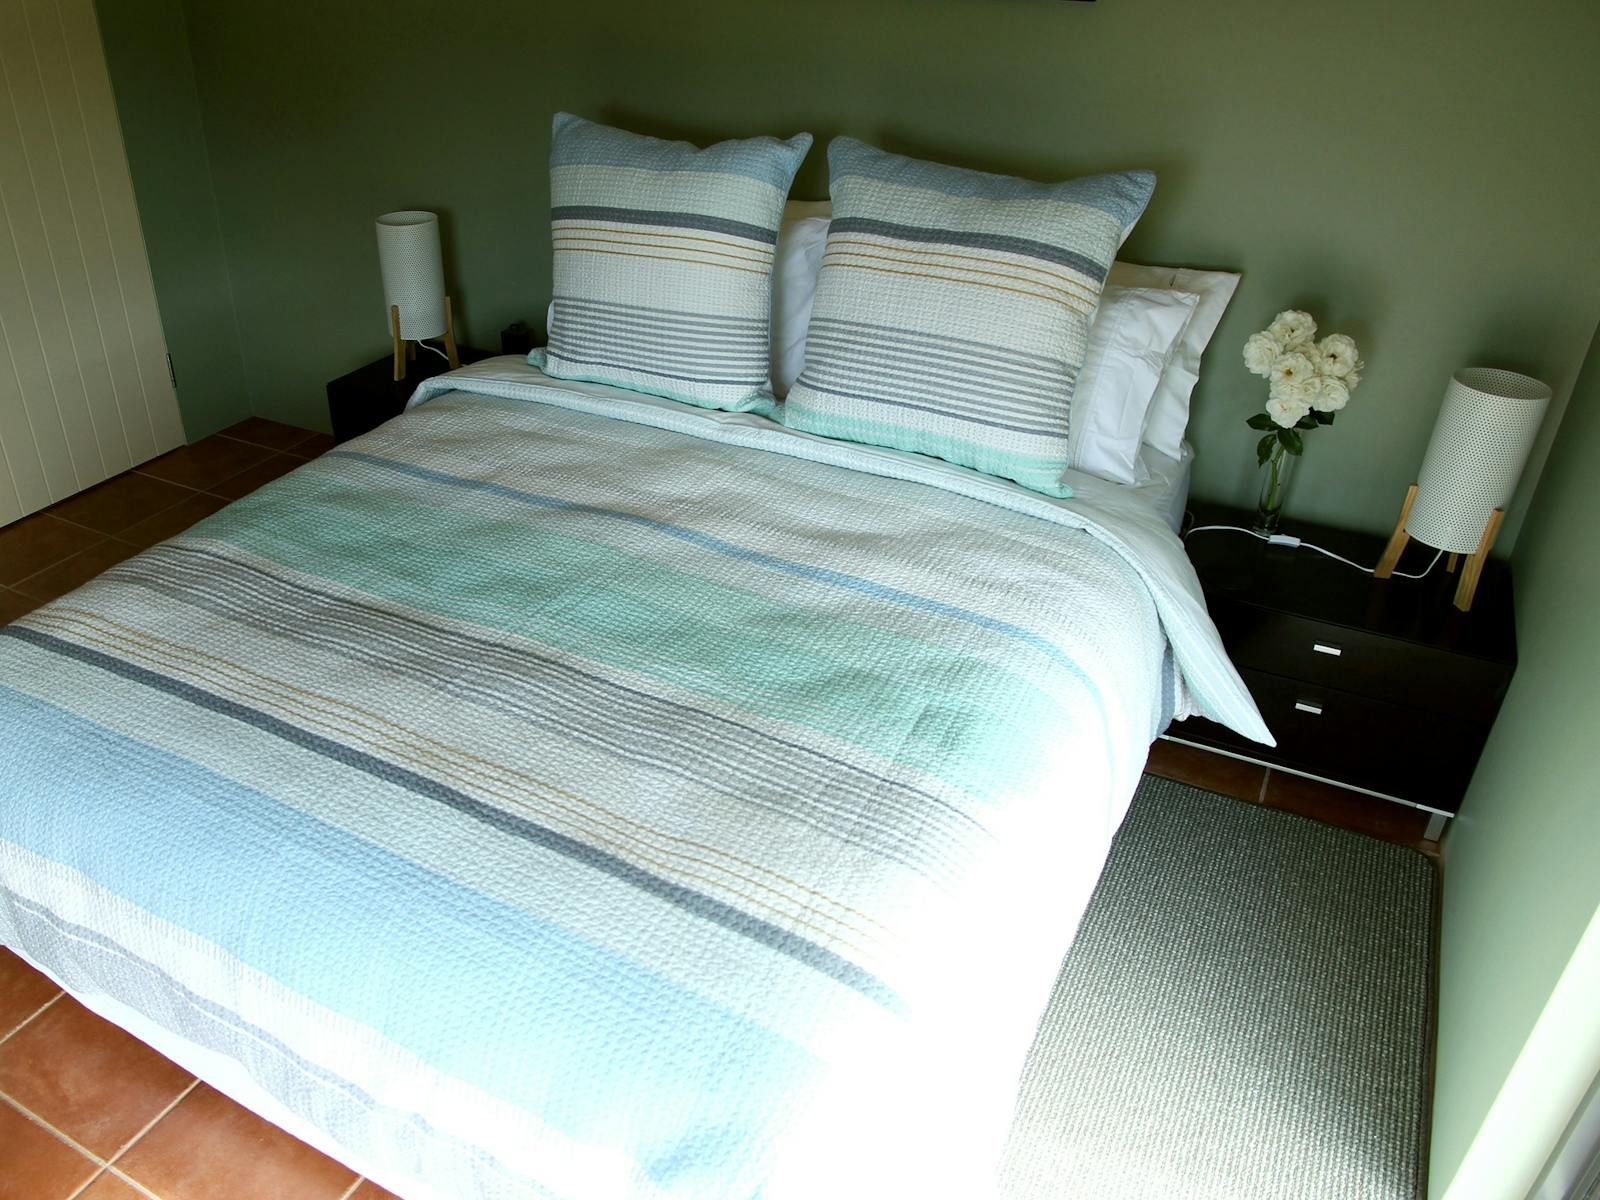 Private bedroom with new queen bed and high quality linens. A super view down to the Tamar.